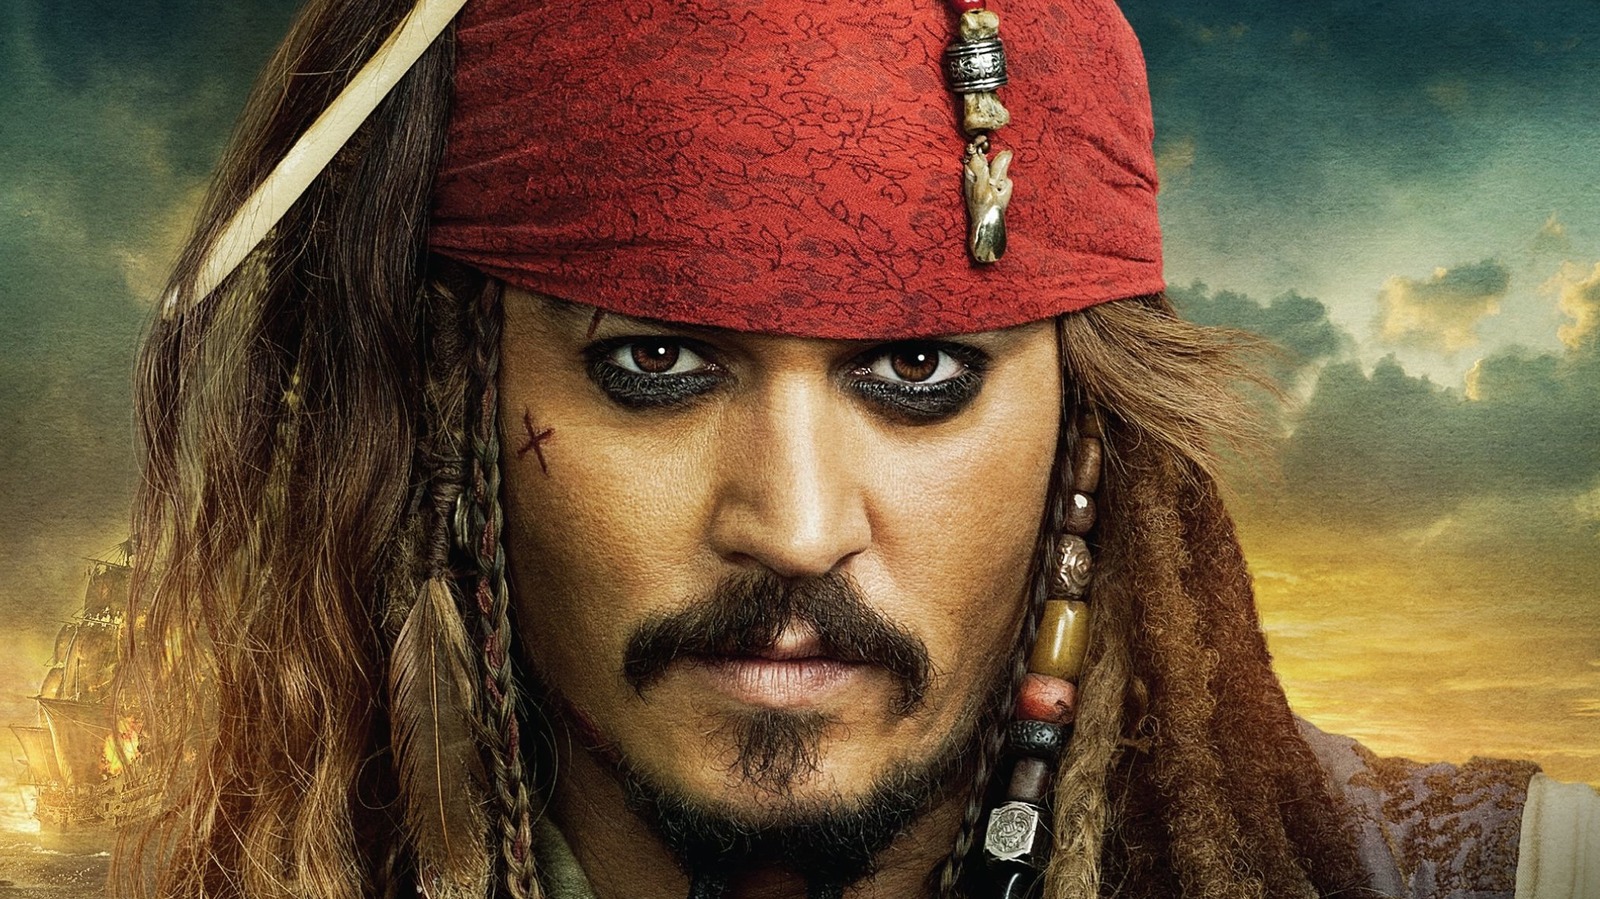 Pirates Of The Caribbean 6 Isn't A Sequel